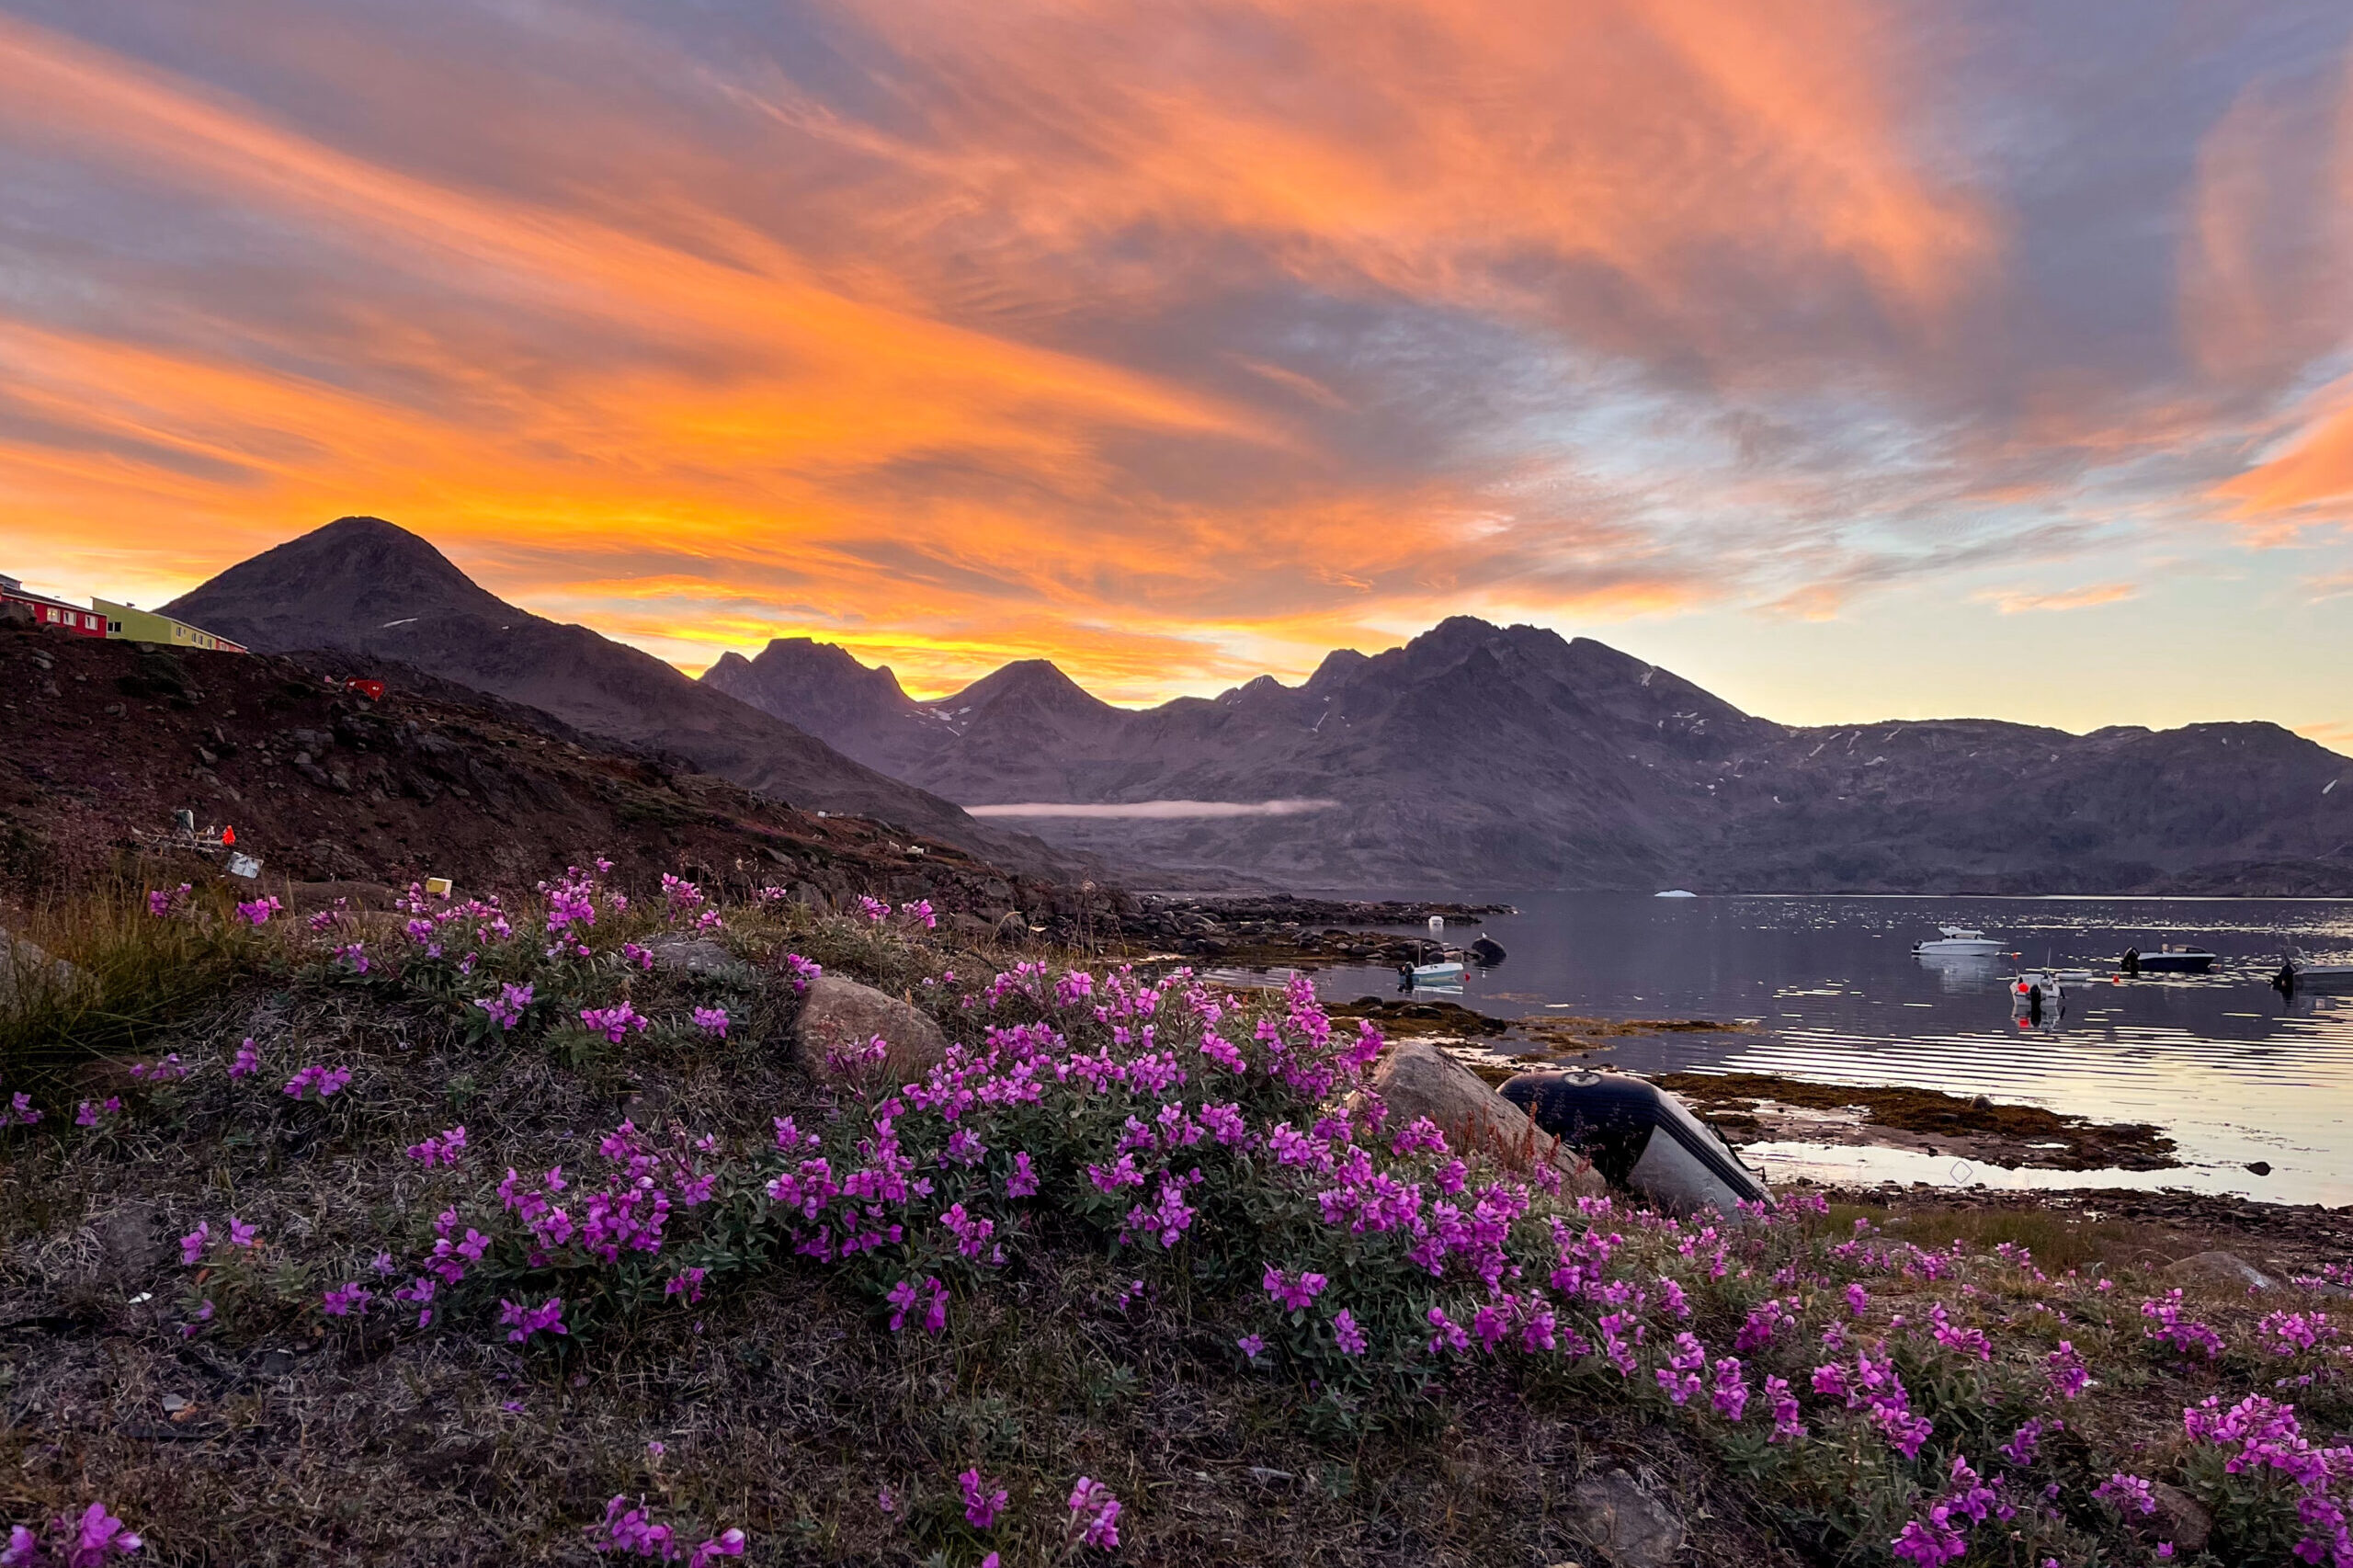 Sunset in Tasiilaq with view over the dog place. Photo by Mathane Qatsa - Visit East Greenland